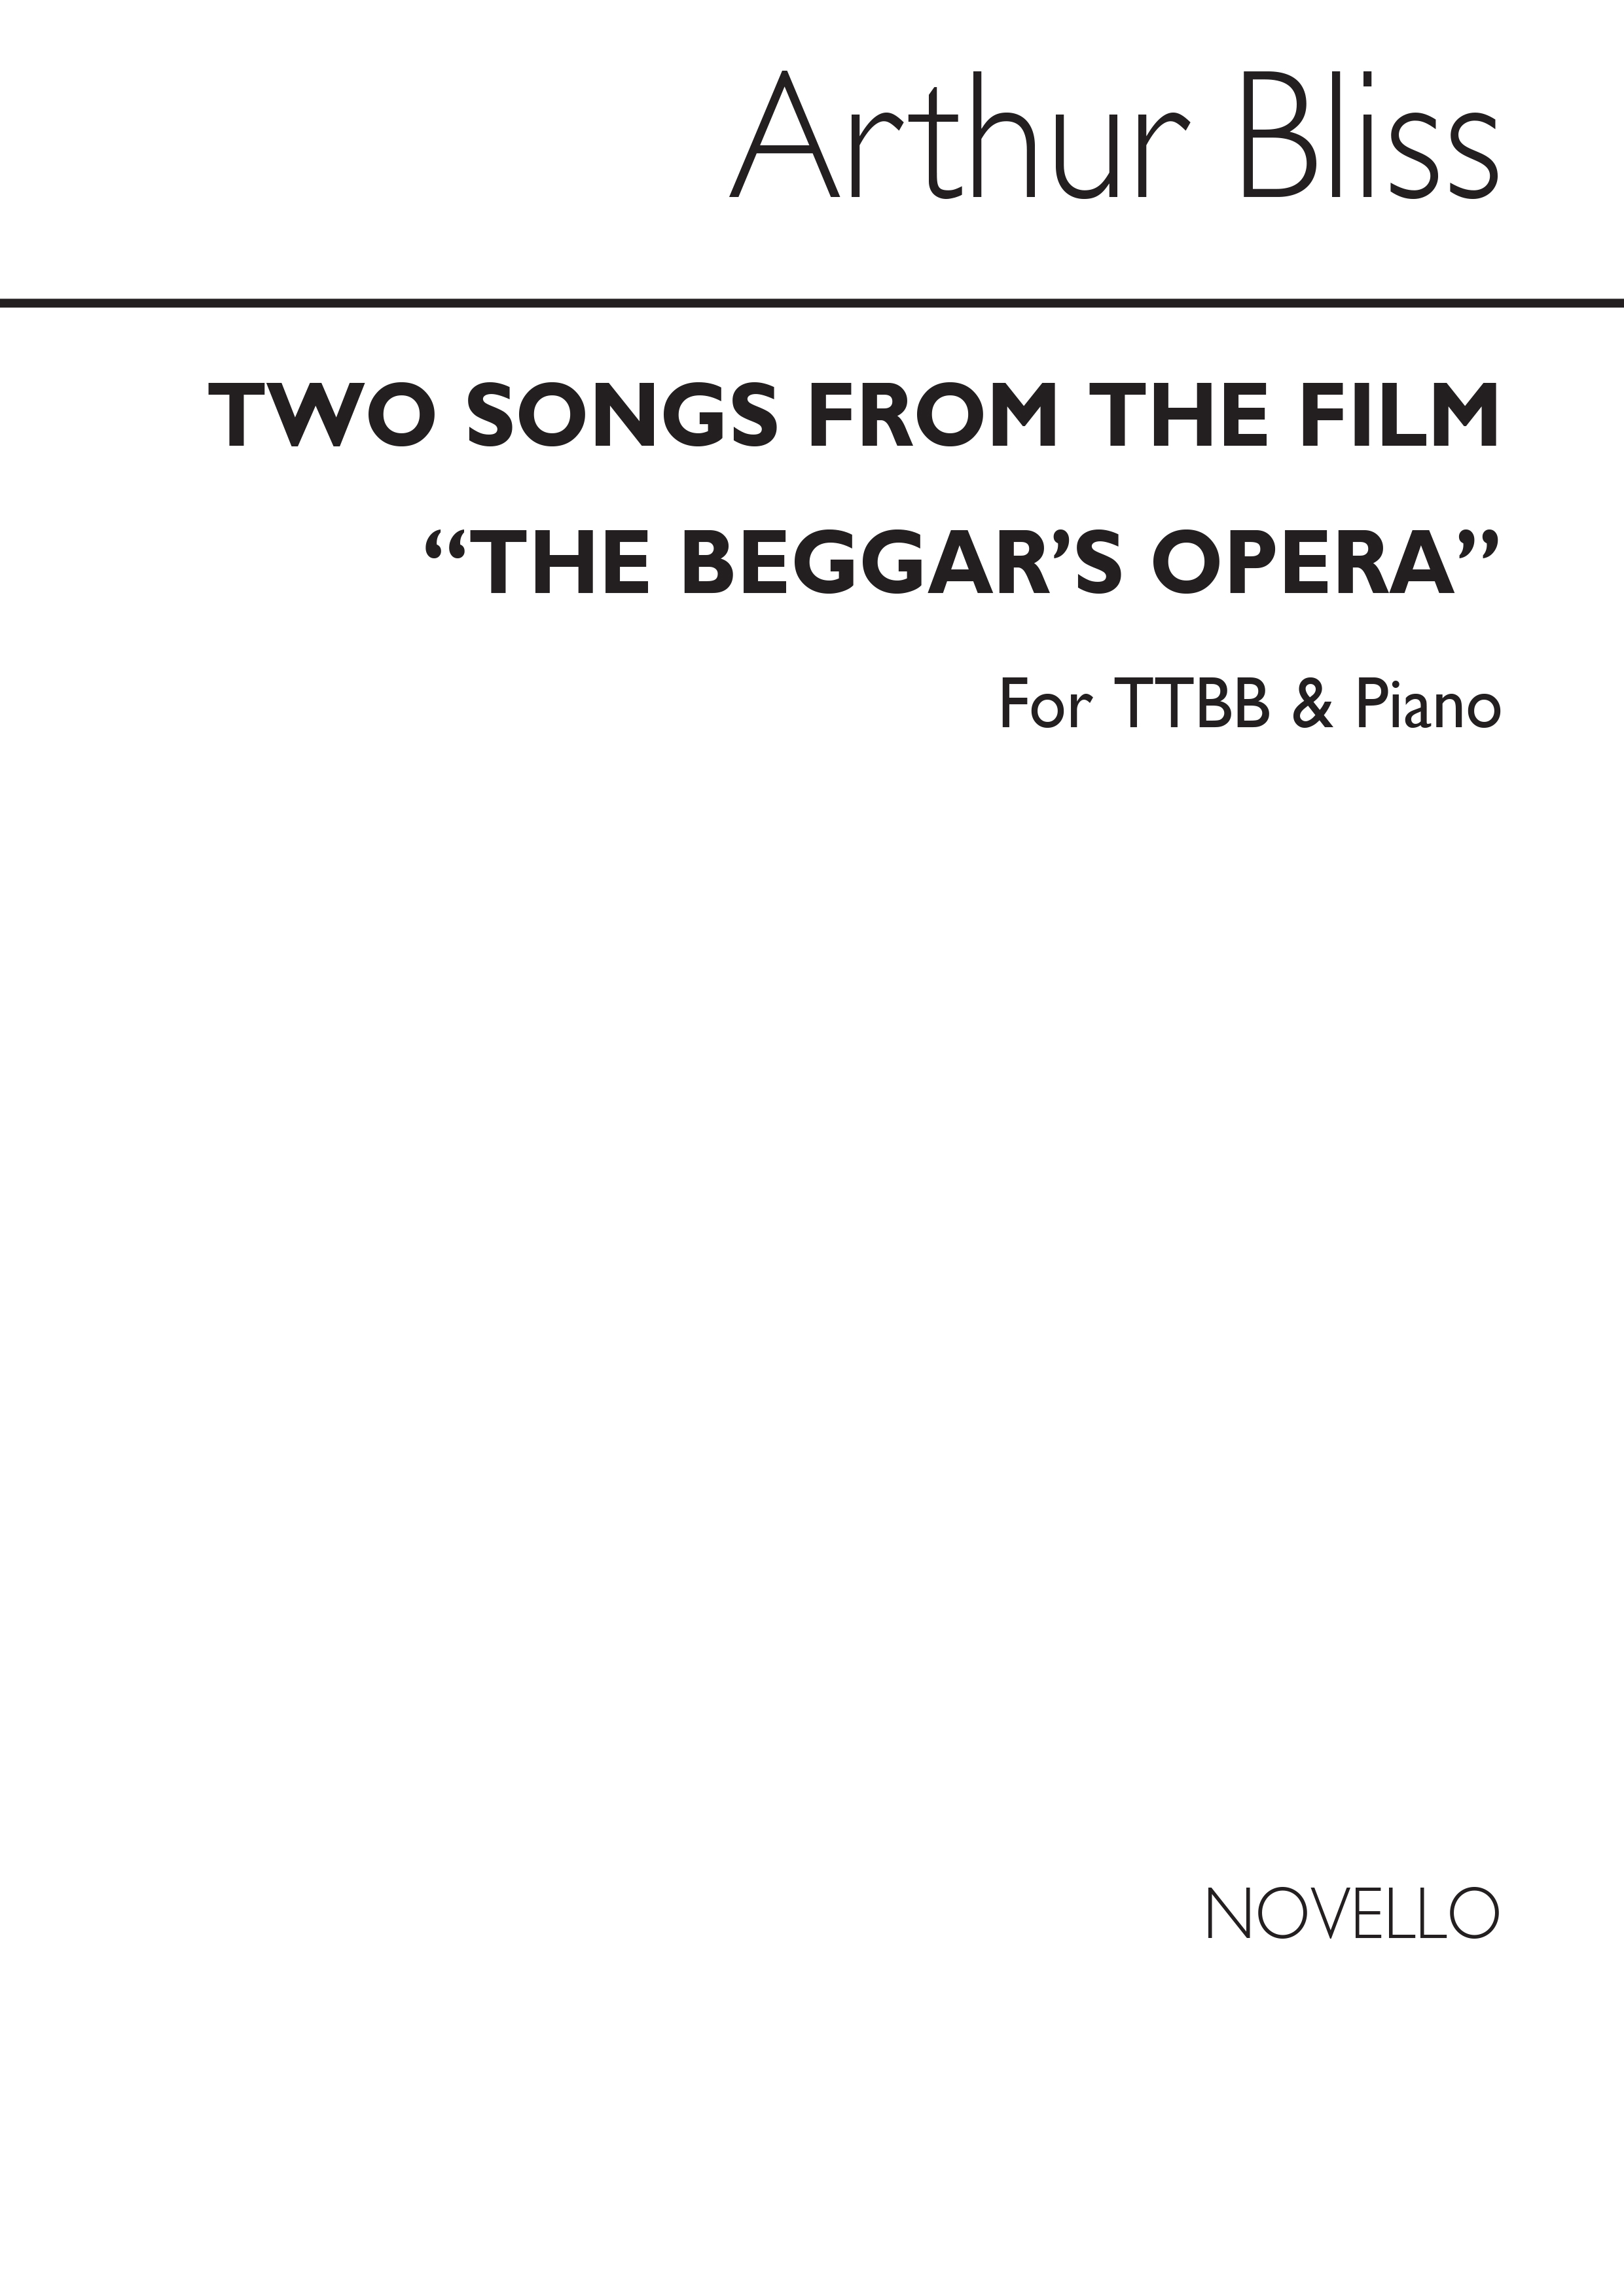 Bliss: Two Songs From Beggars' Opera for TTBB Chorus and Piano